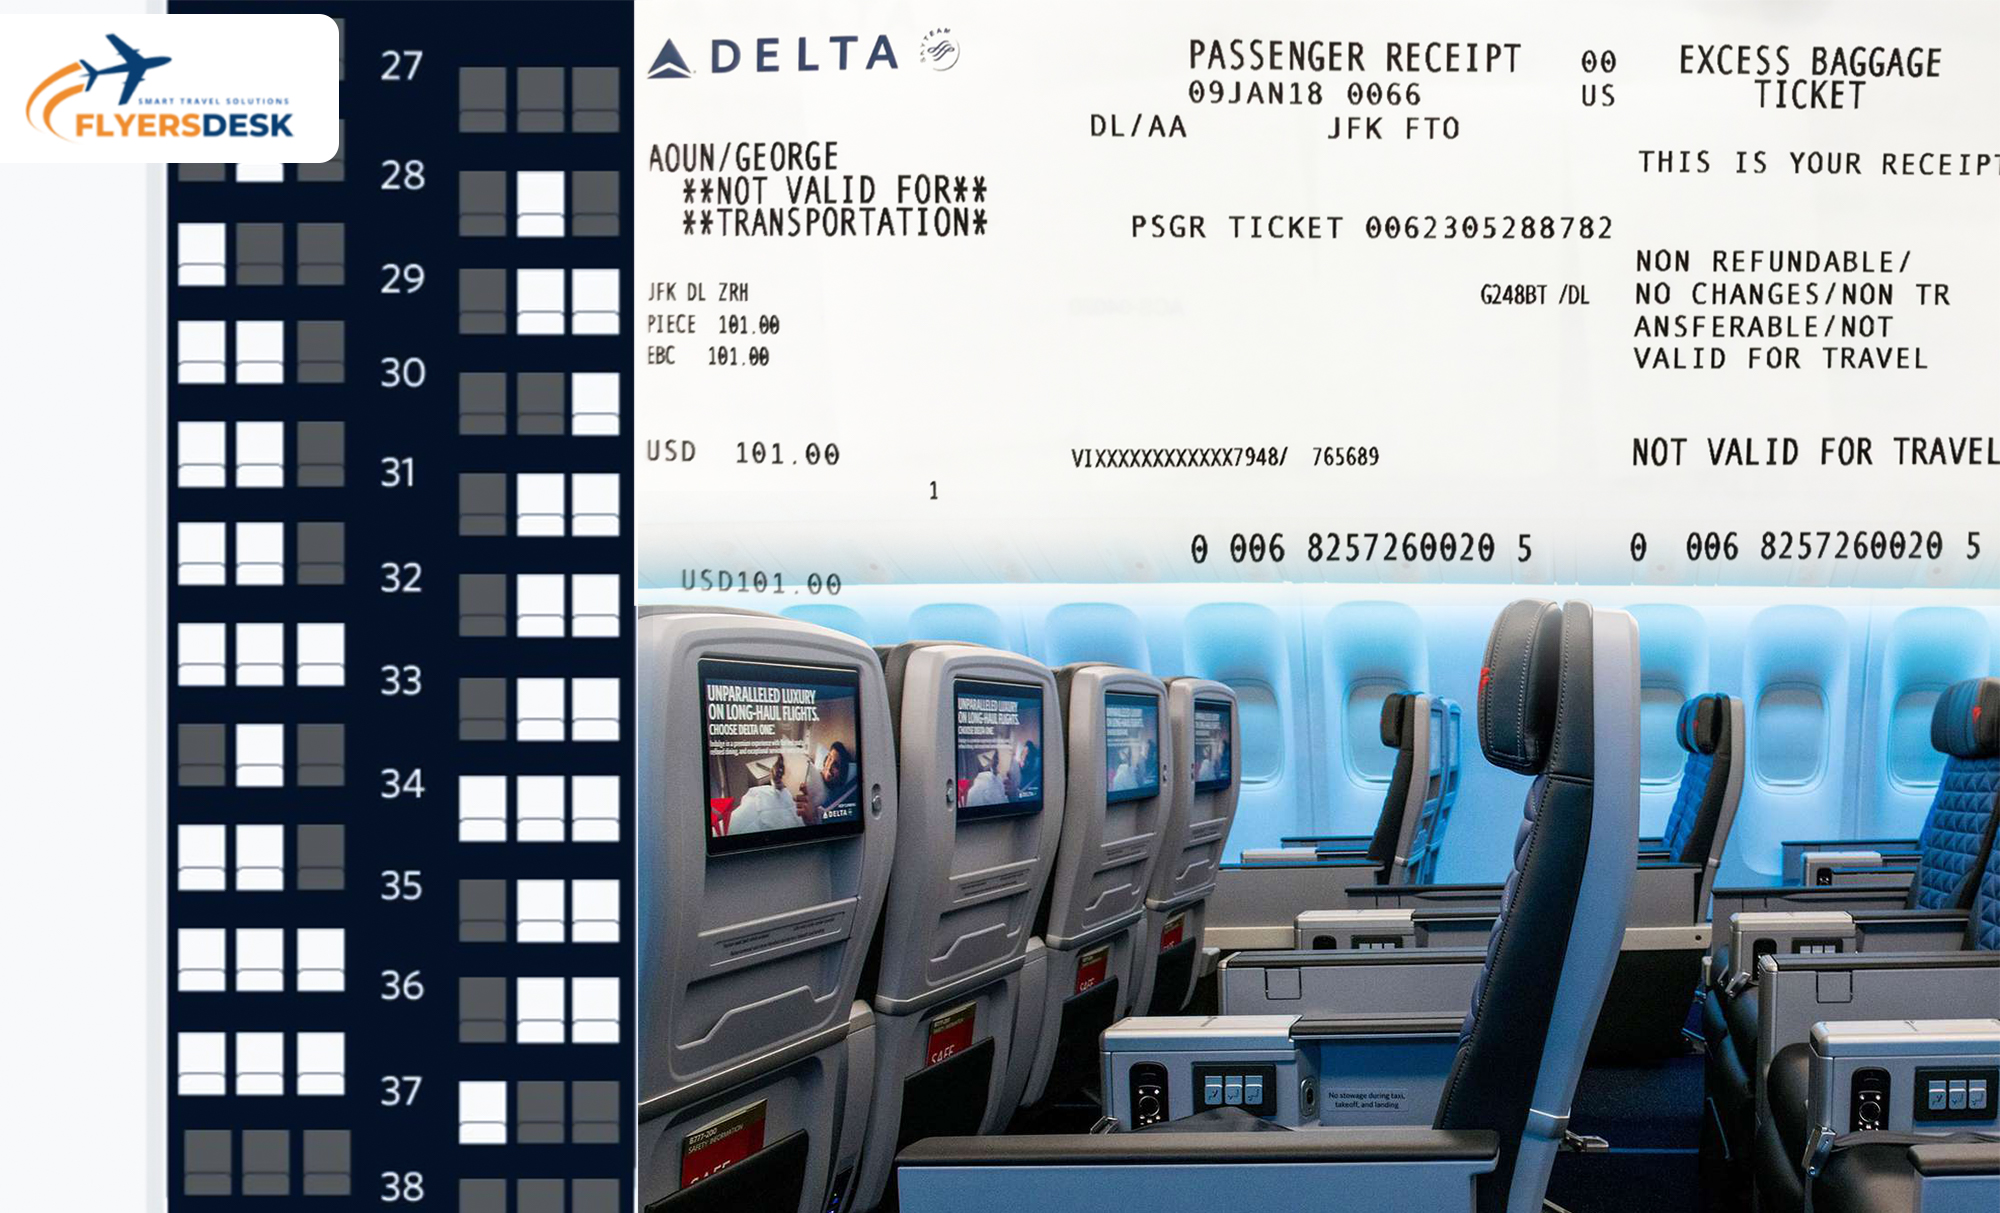 How to Make Delta Seat Selection